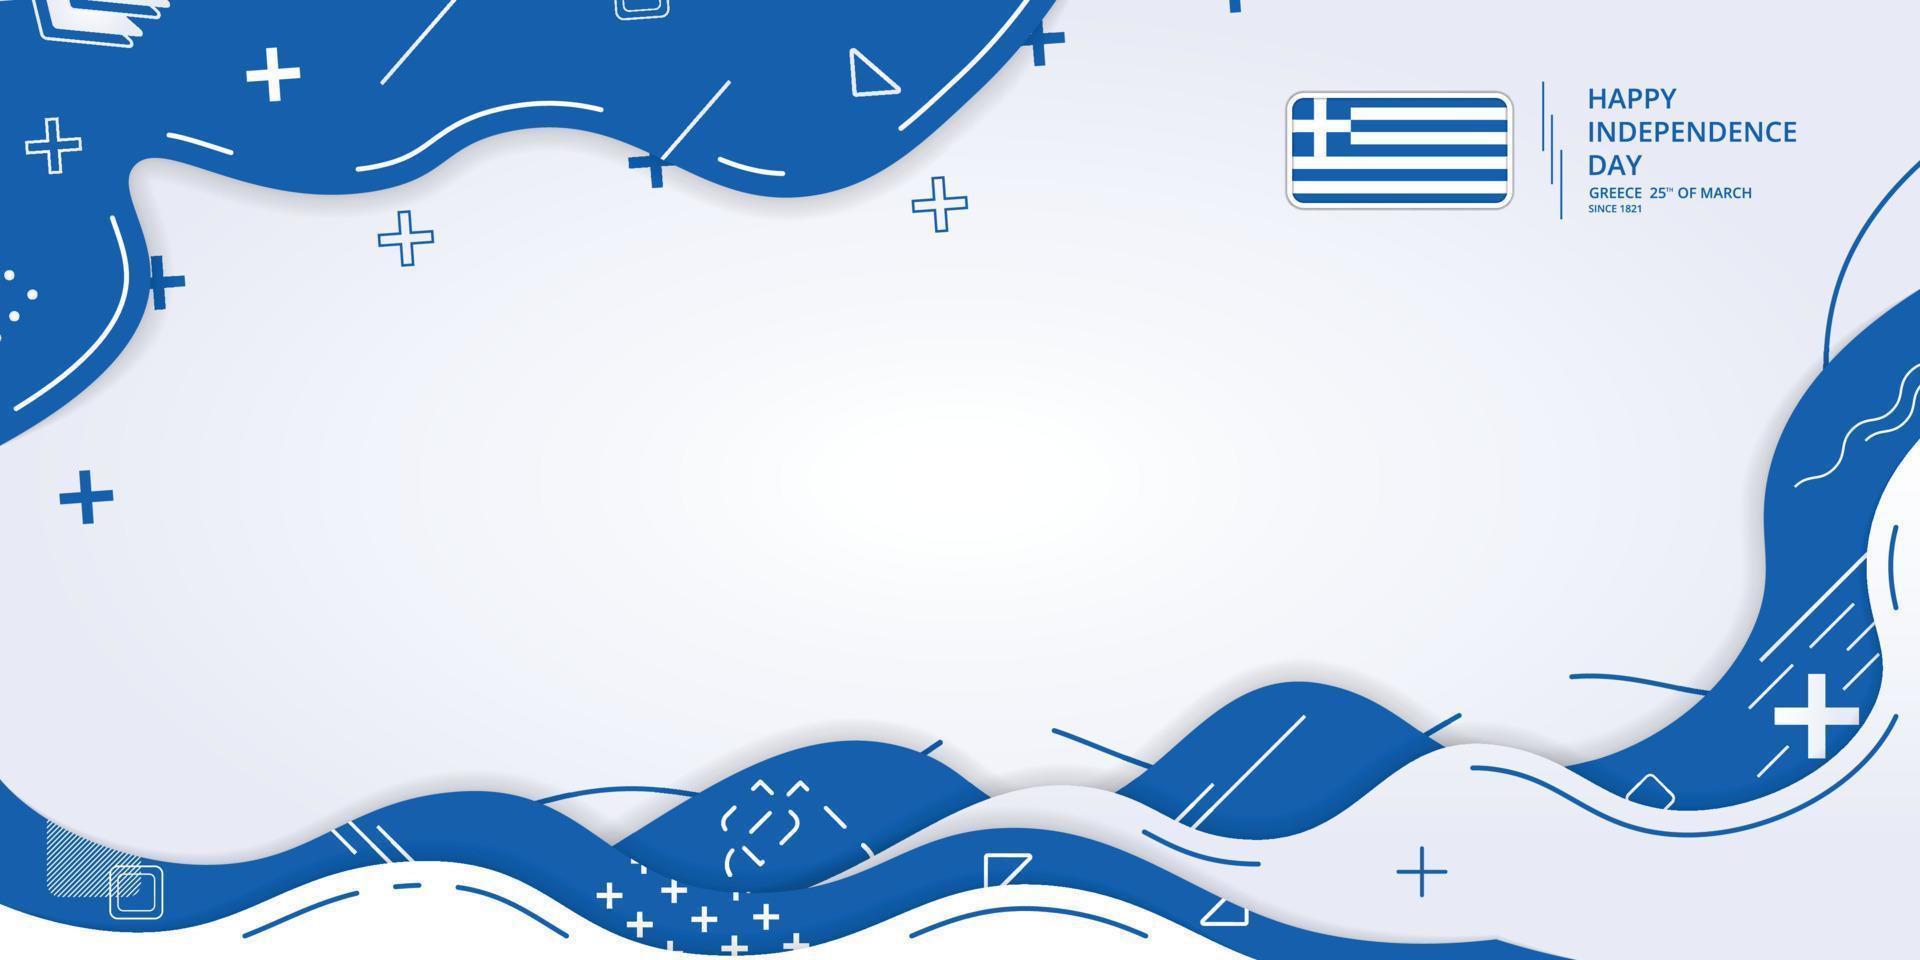 design background to commemorate greece independence day vector